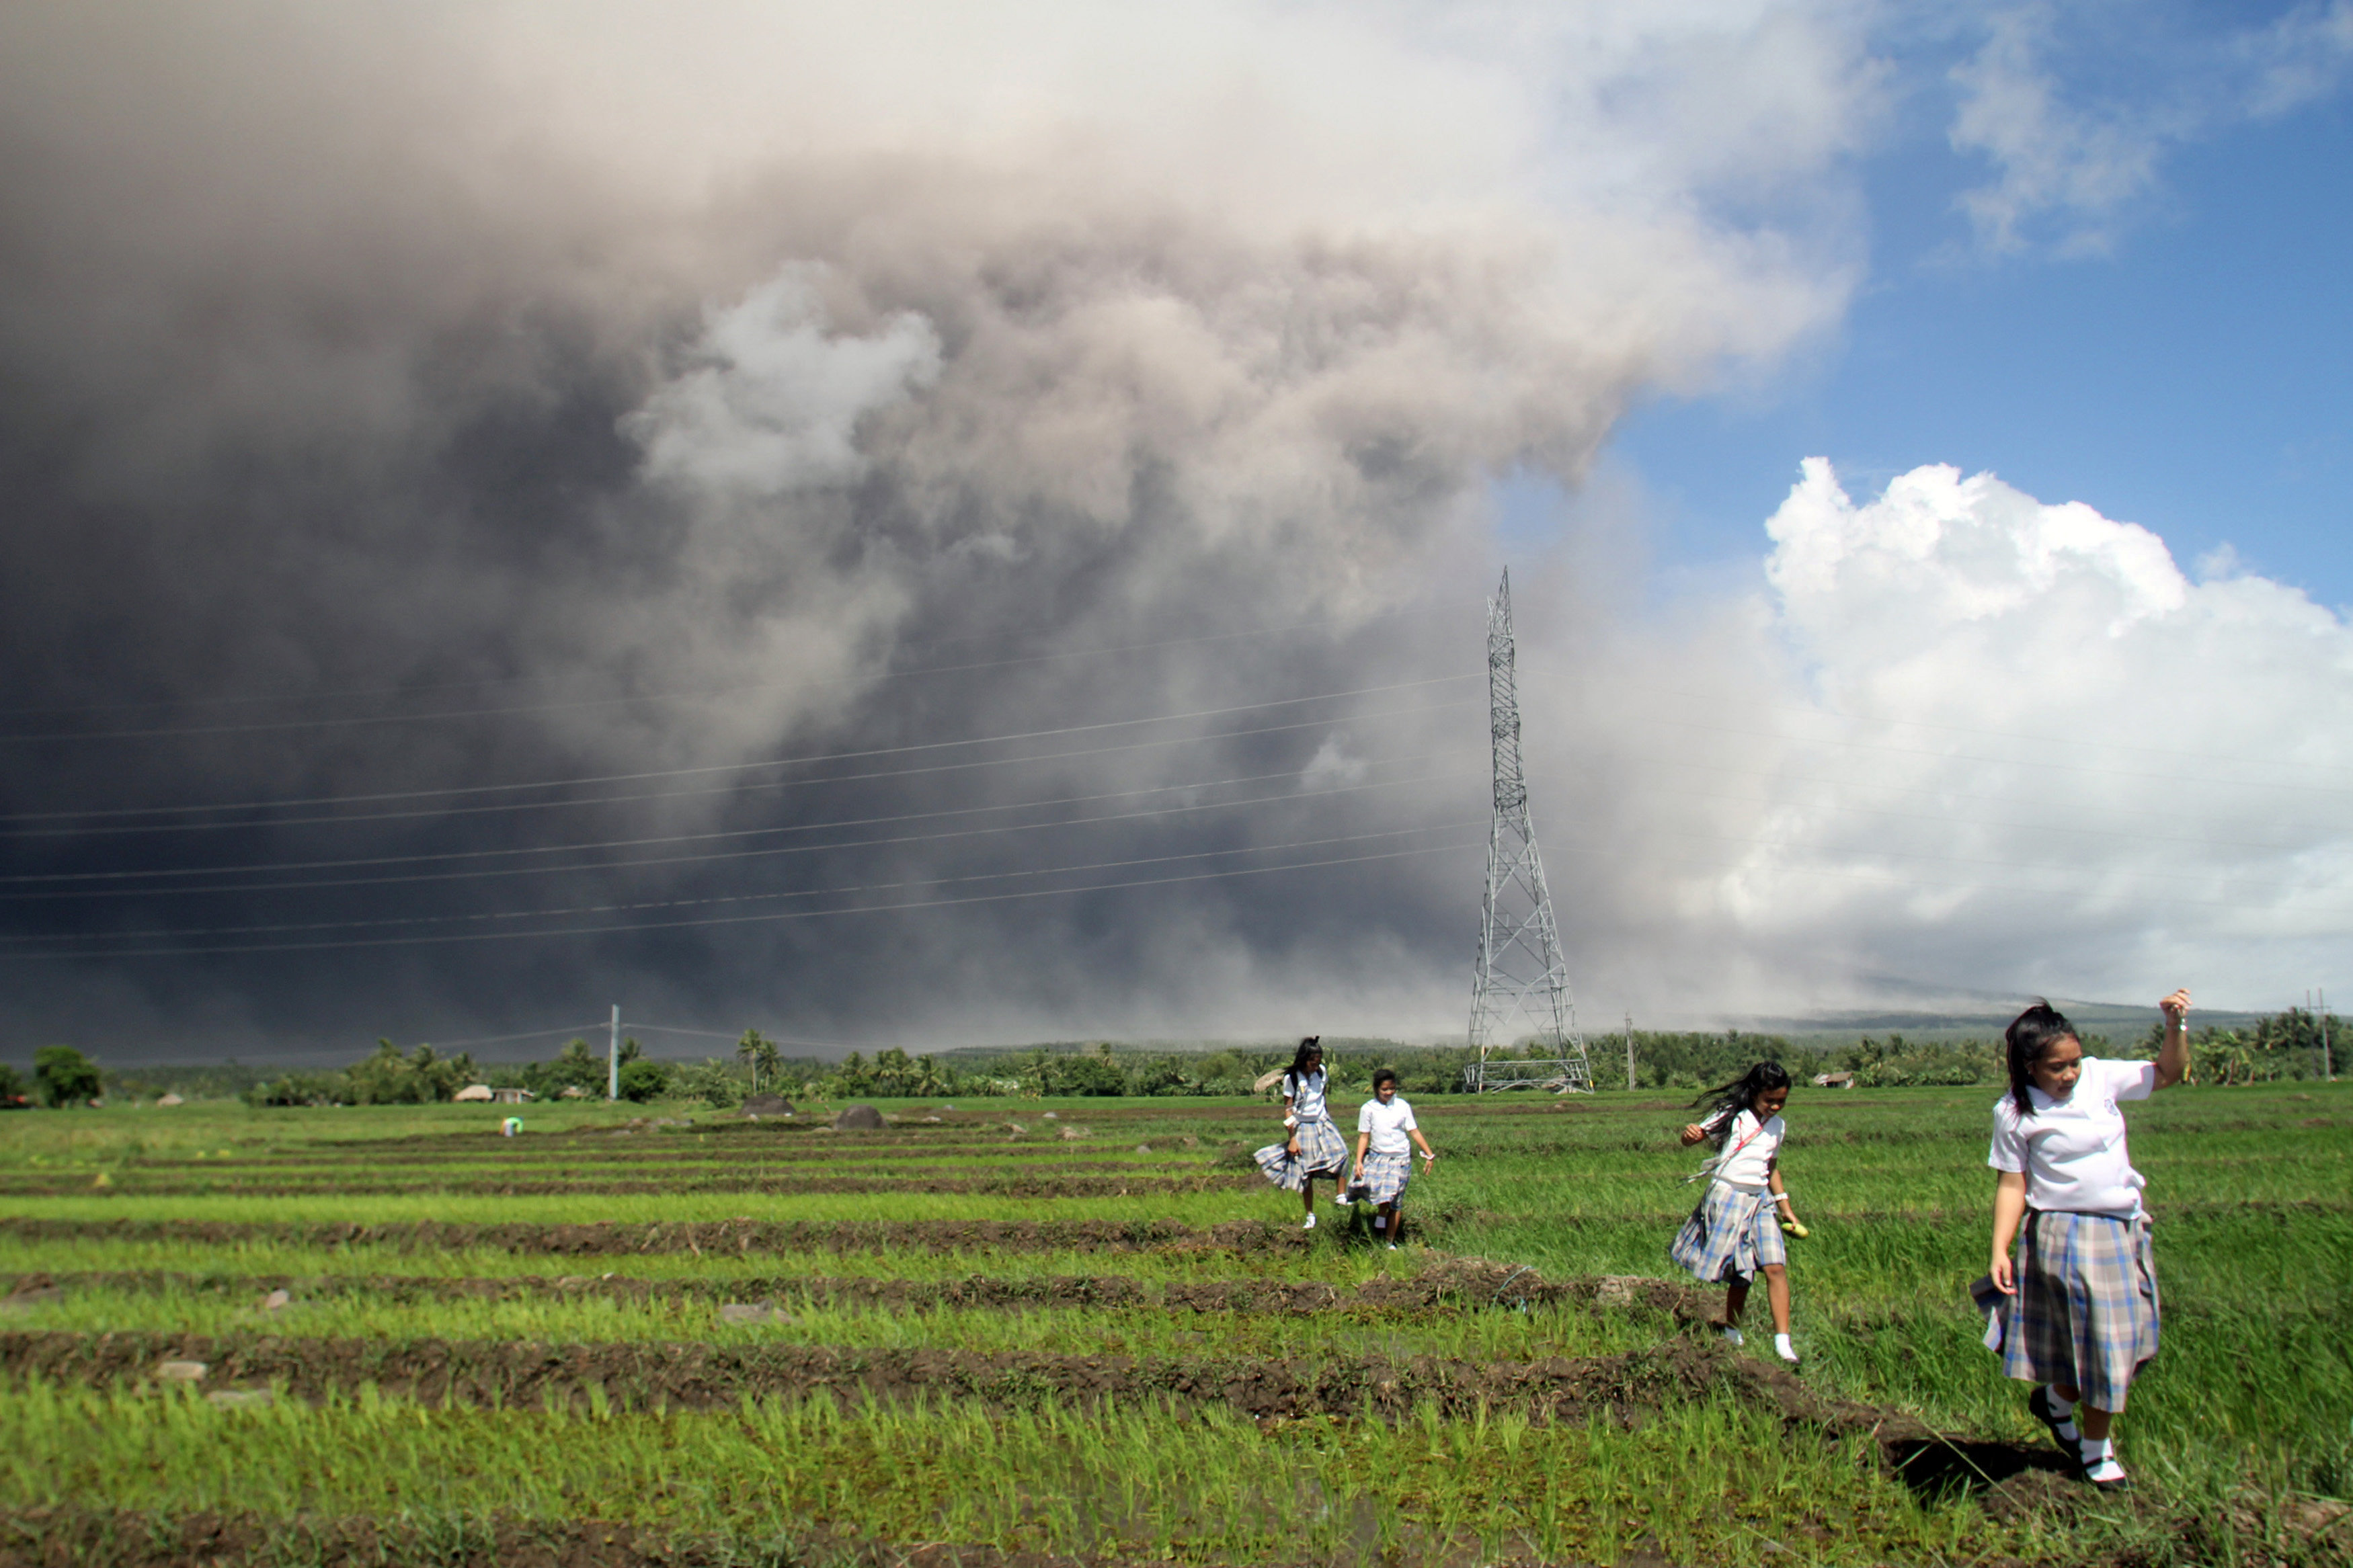 In pictures: People flee as Philippine volcano spews heavy ash